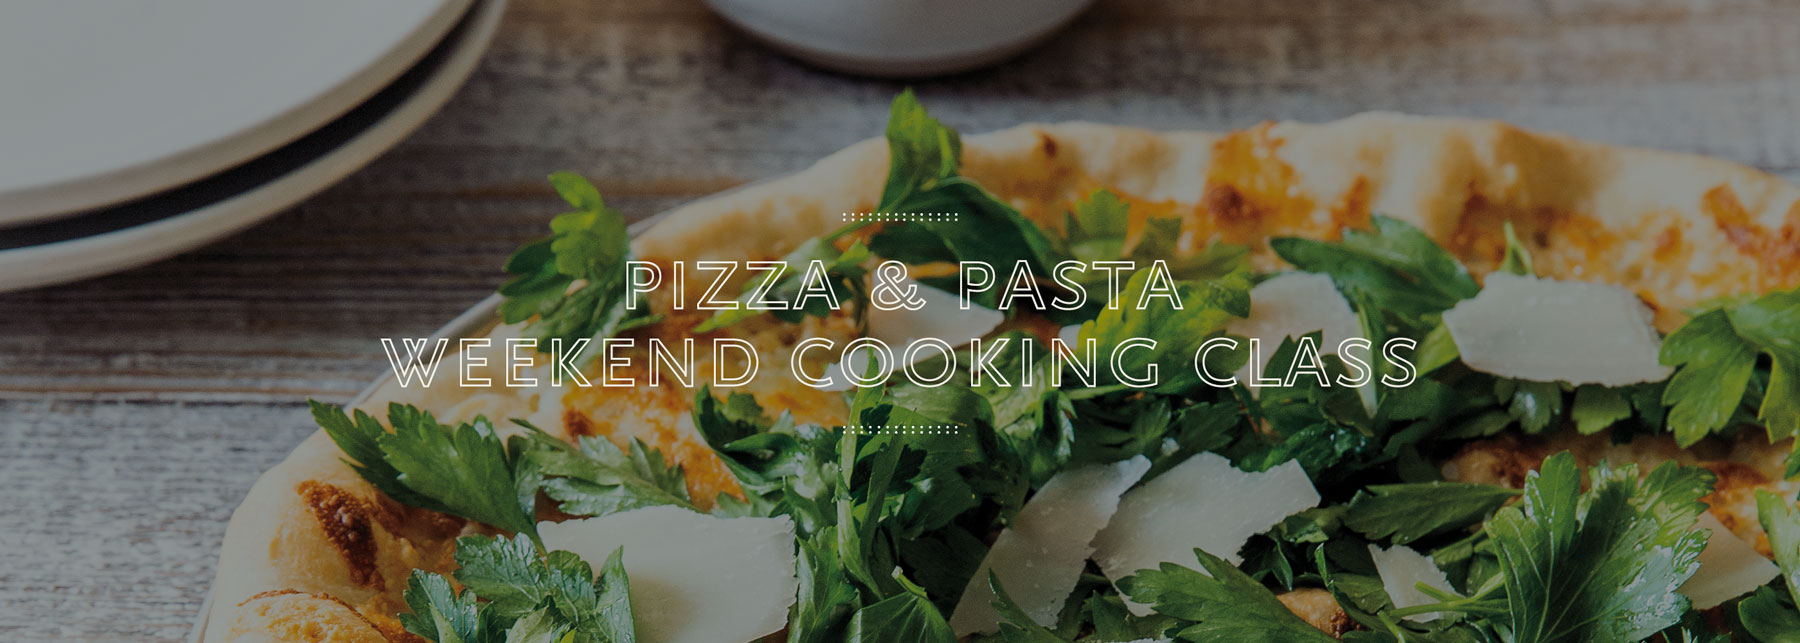 Pizza & Pasta Weekend Cooking Class